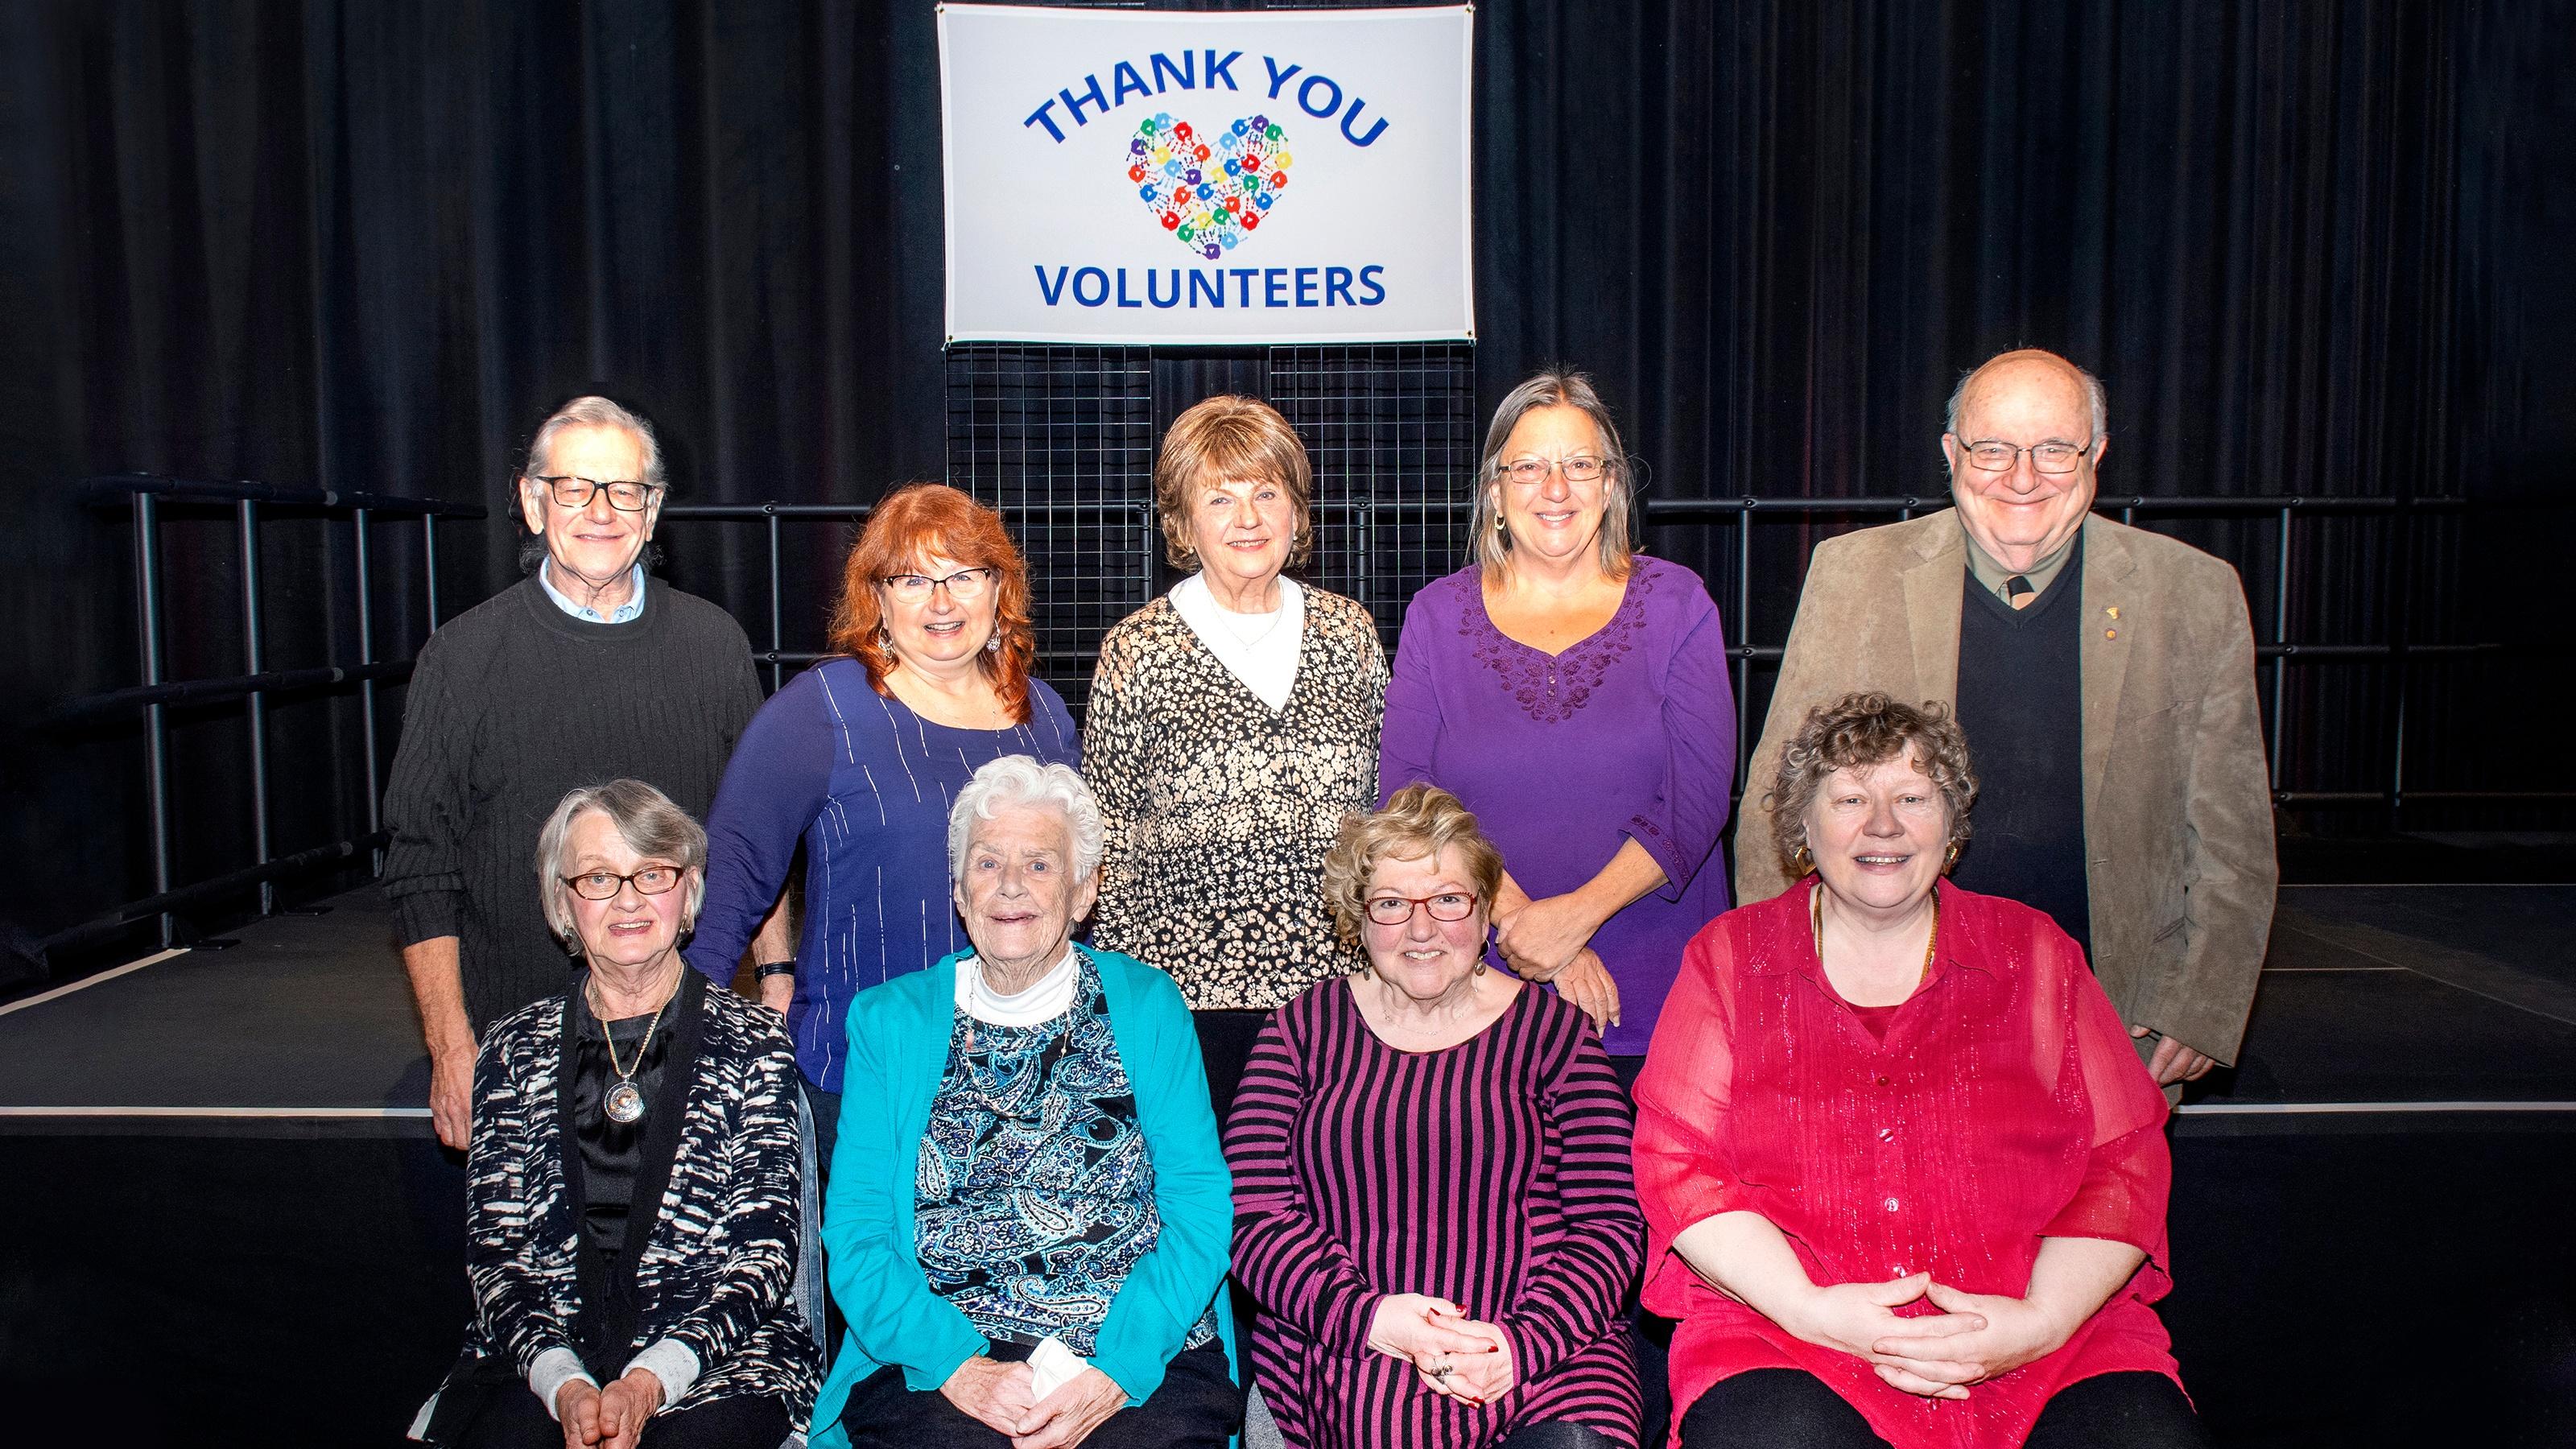 2017 Top 10 WNED | WBFO Volunteer; they have over 3,300 combined hours! So much of what we do would not be possible without the time, energy and talents of our many volunteers!